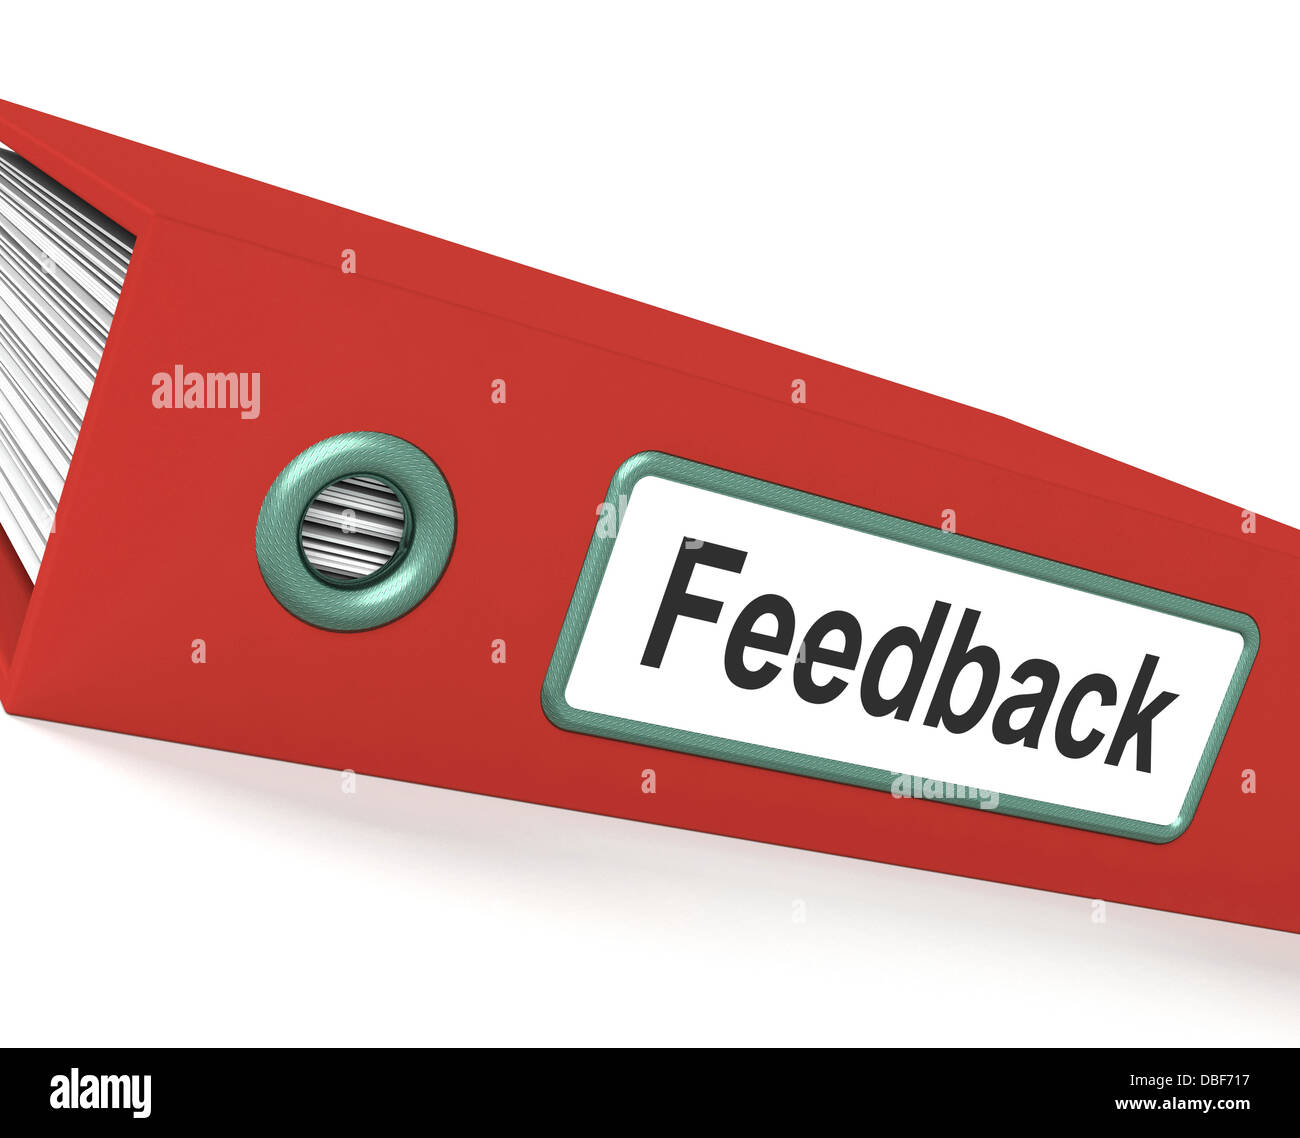 Feedback File Showing Opinions And Surveys Stock Photo